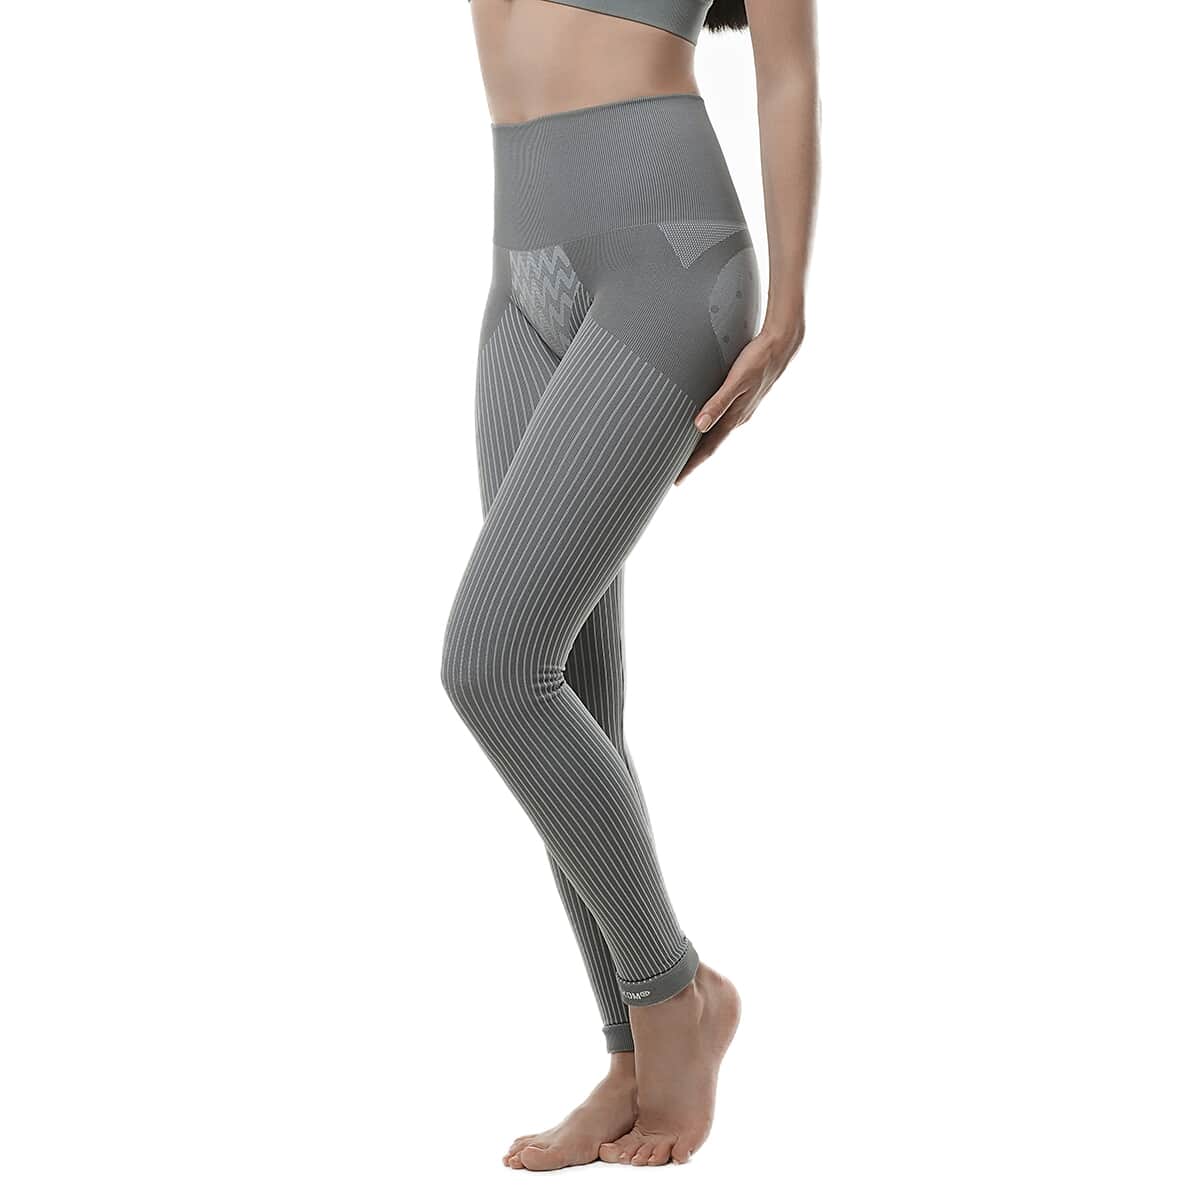 SANKOM Patent Gray Posture And Shaper Leggings For Women With Bamboo Fibers - M/L image number 4